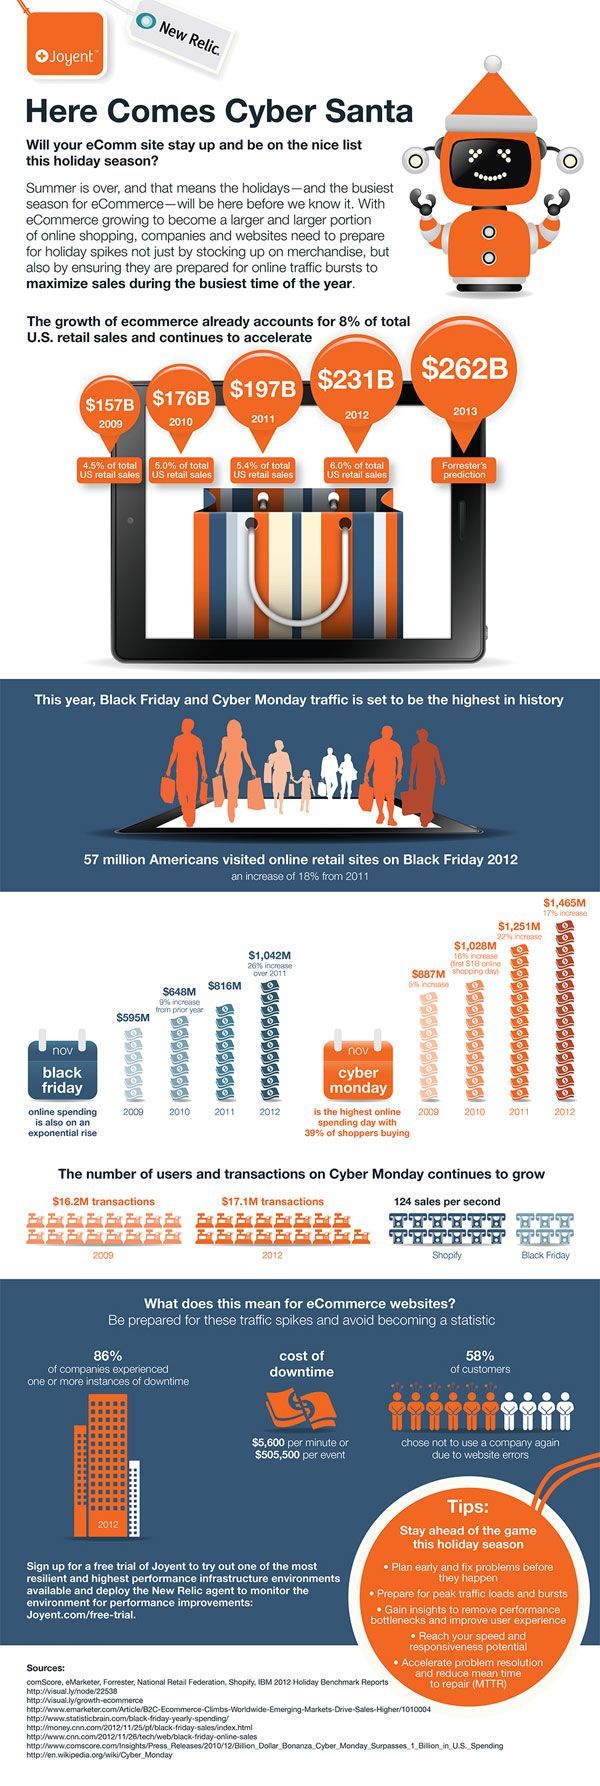 20 Black Friday And Cyber Monday Infographics image 20.jpg